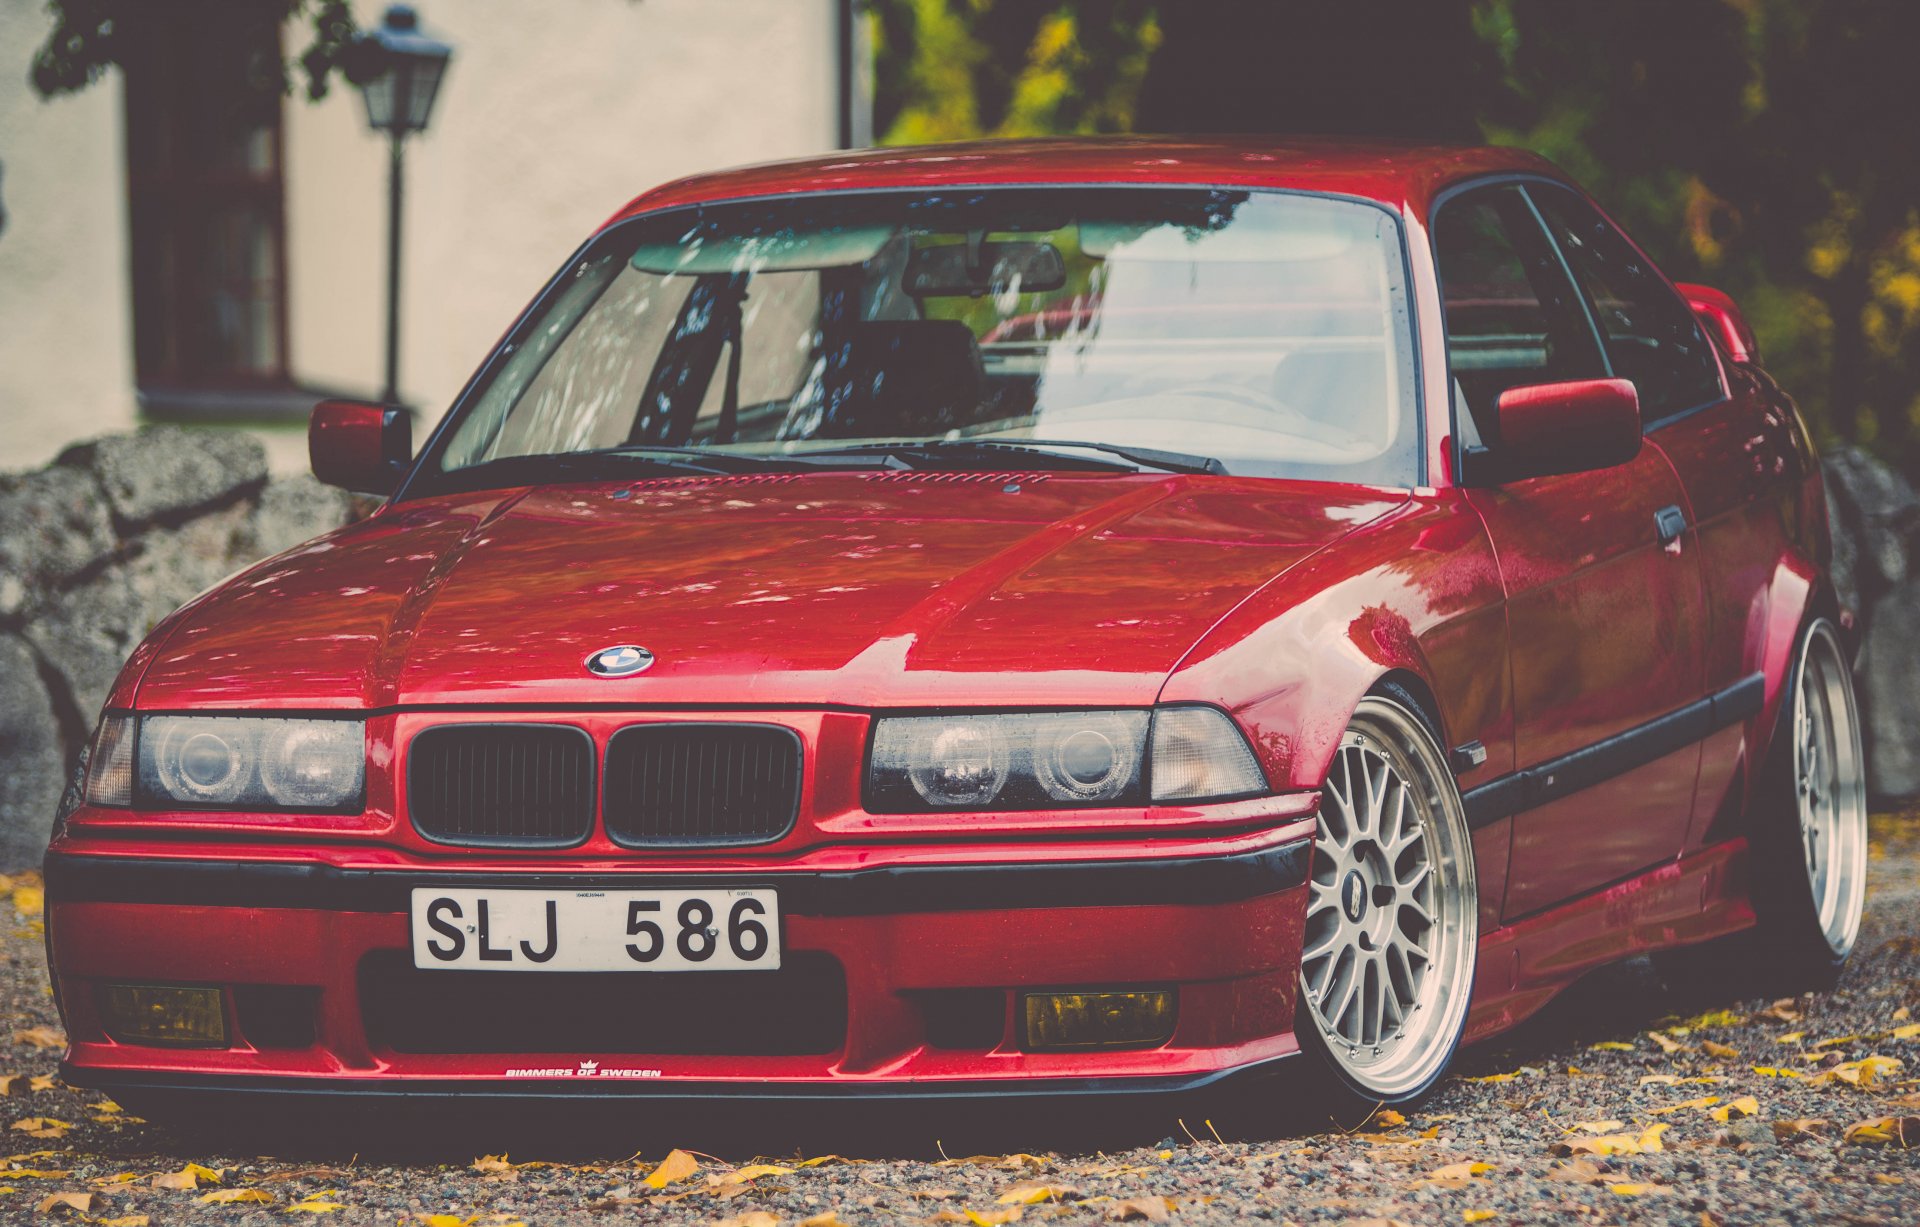 Hd Wallpaper Bmw E36 M3 Tuning Stance Red